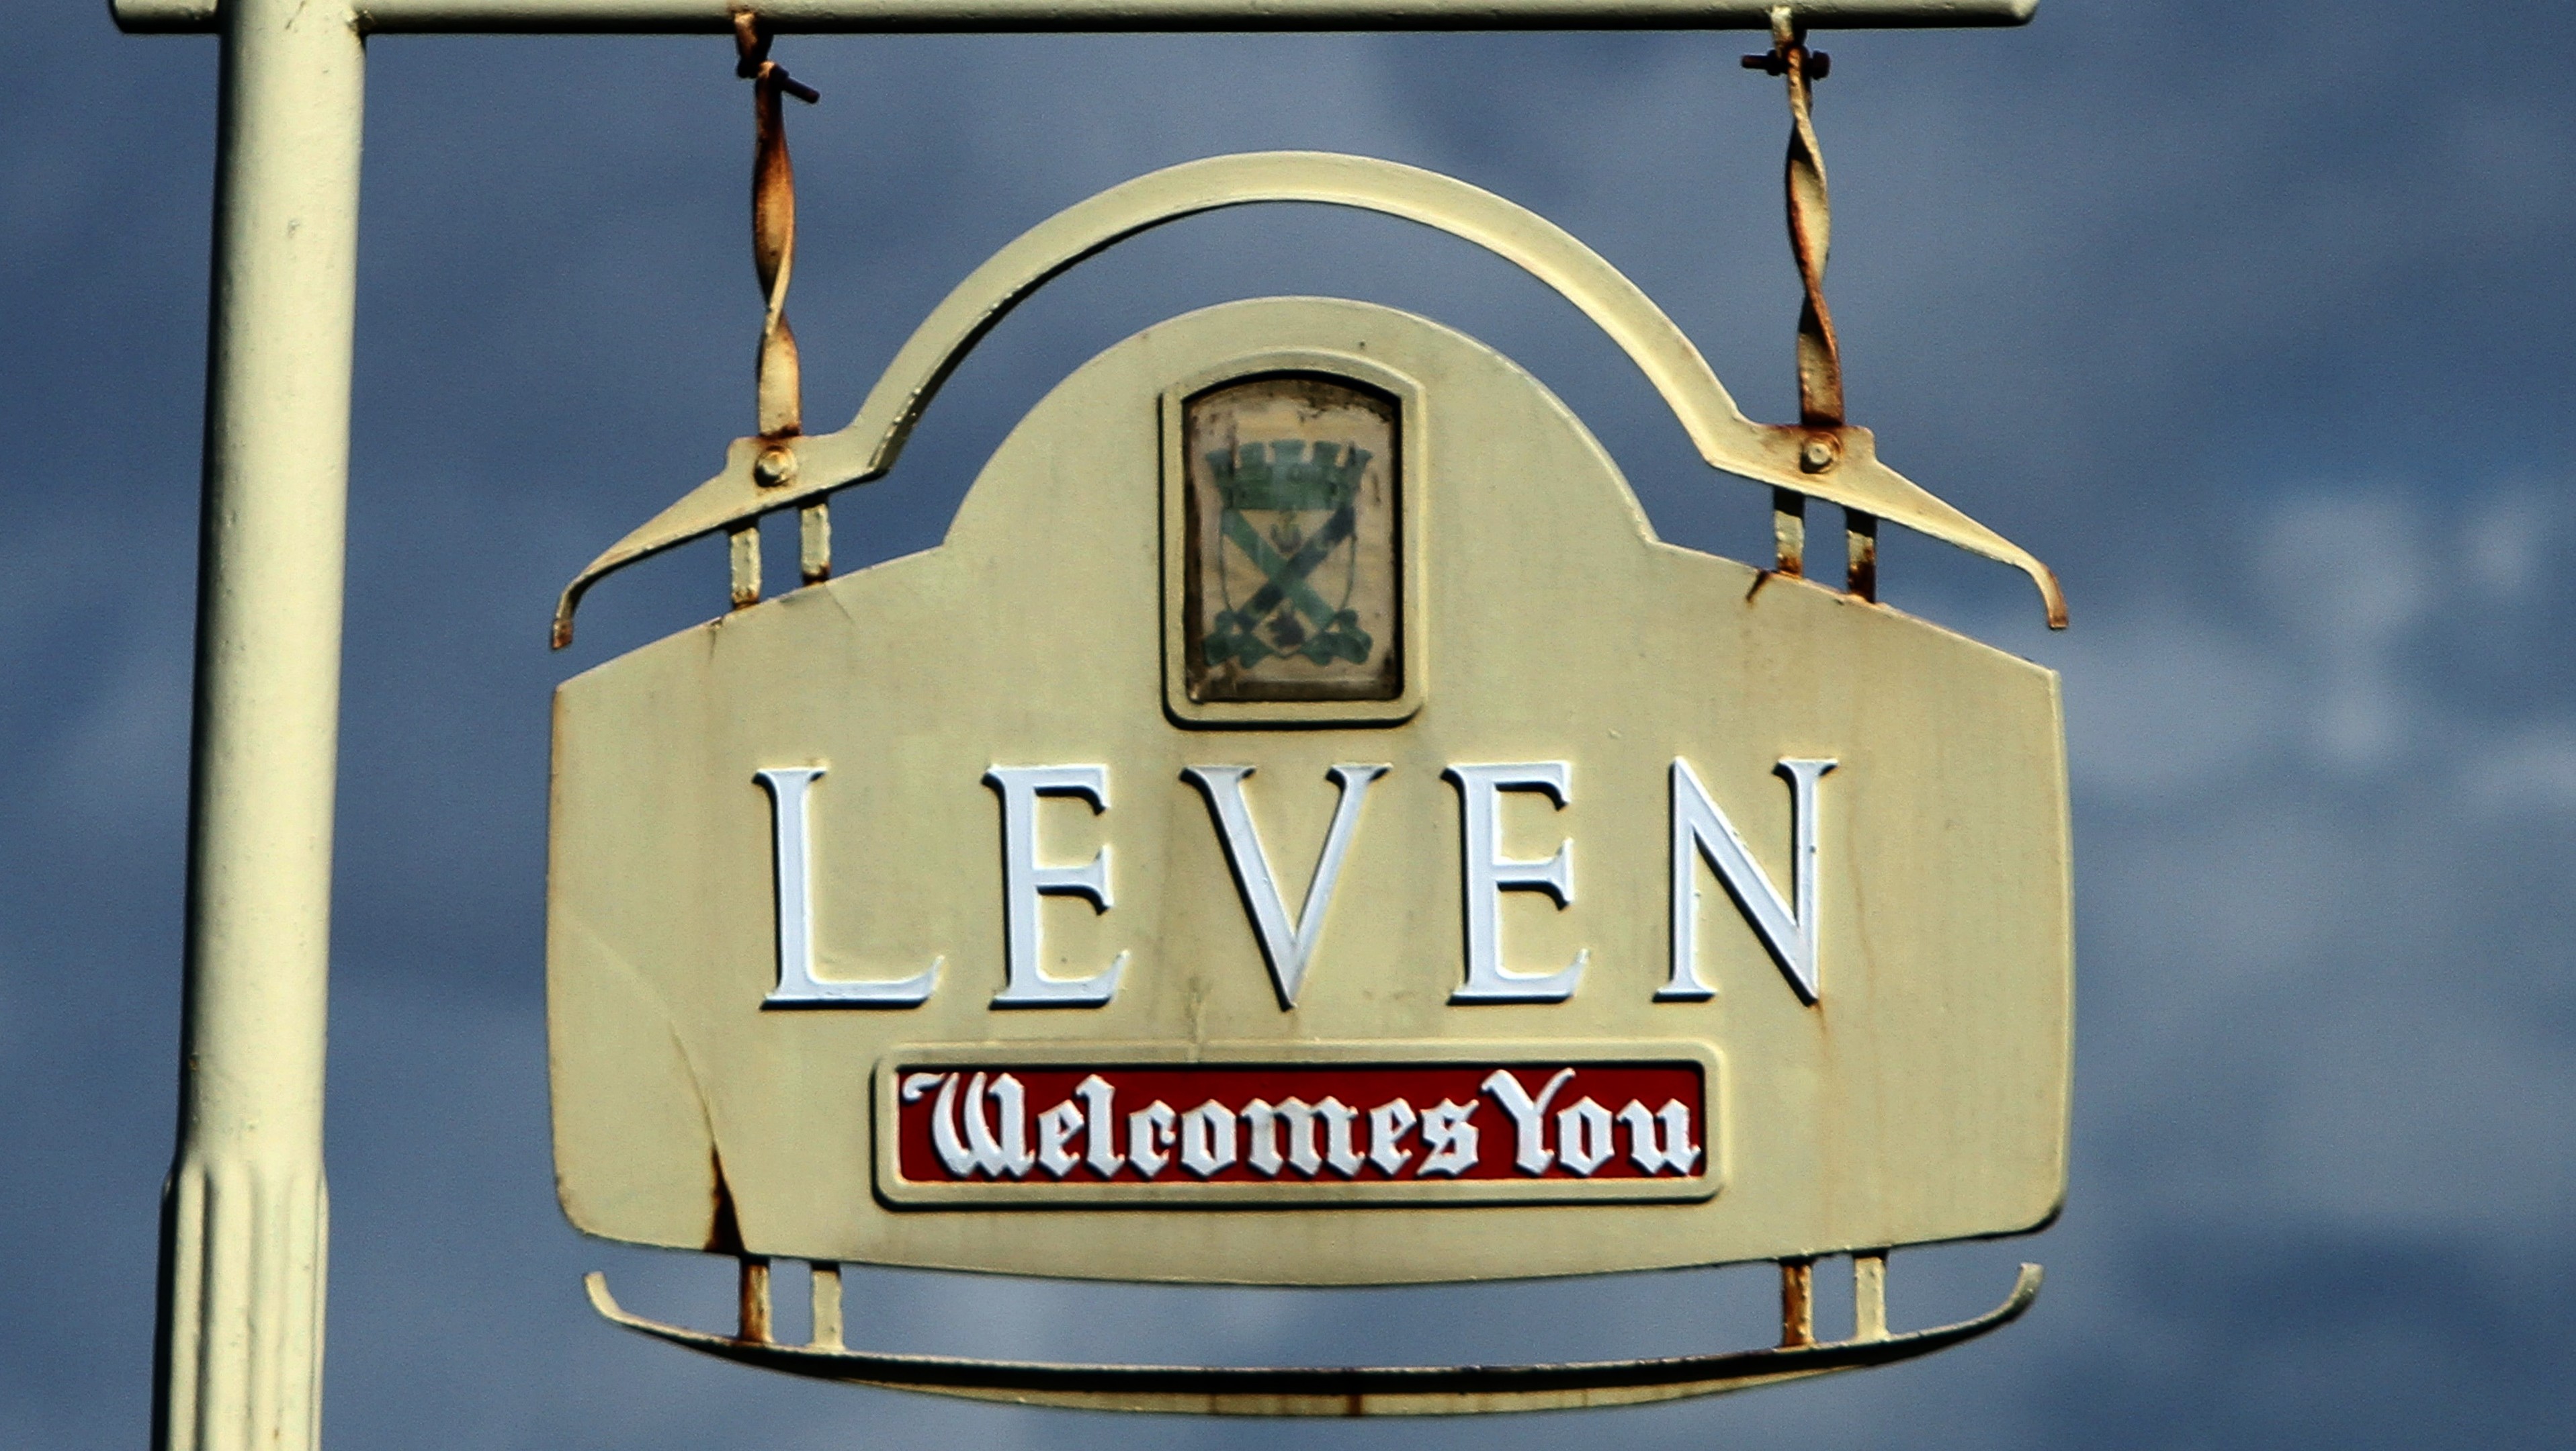 Kris Miller, Courier, Picture today shows general view of the Leven sign